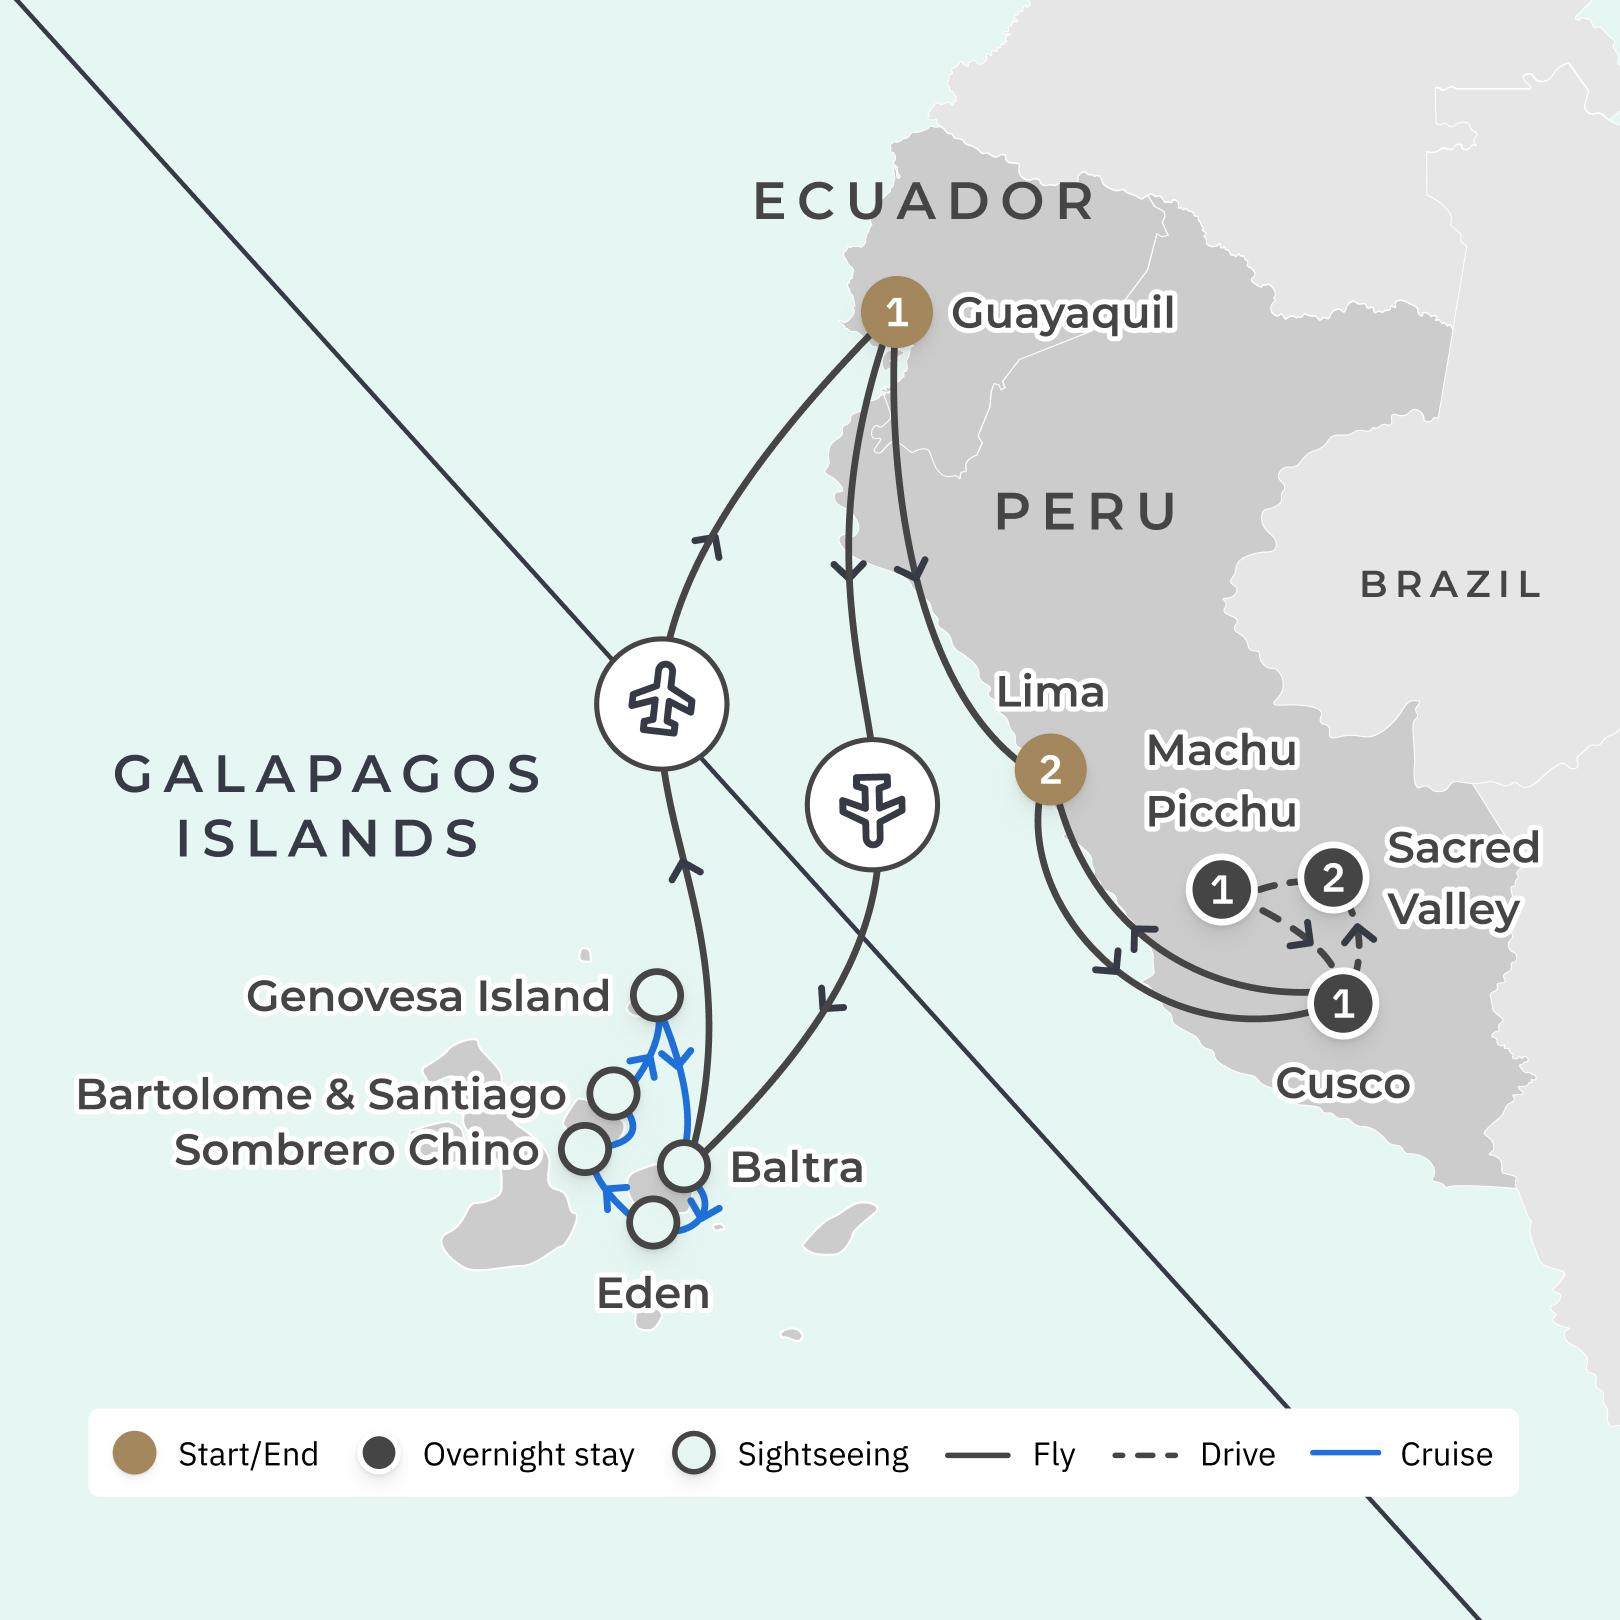 Ecuador & Peru Ultra-Lux Tour with Galapagos Islands Cruise, Machu Picchu, Sacred Valley & Luxury Eco-Lodge Stay route map